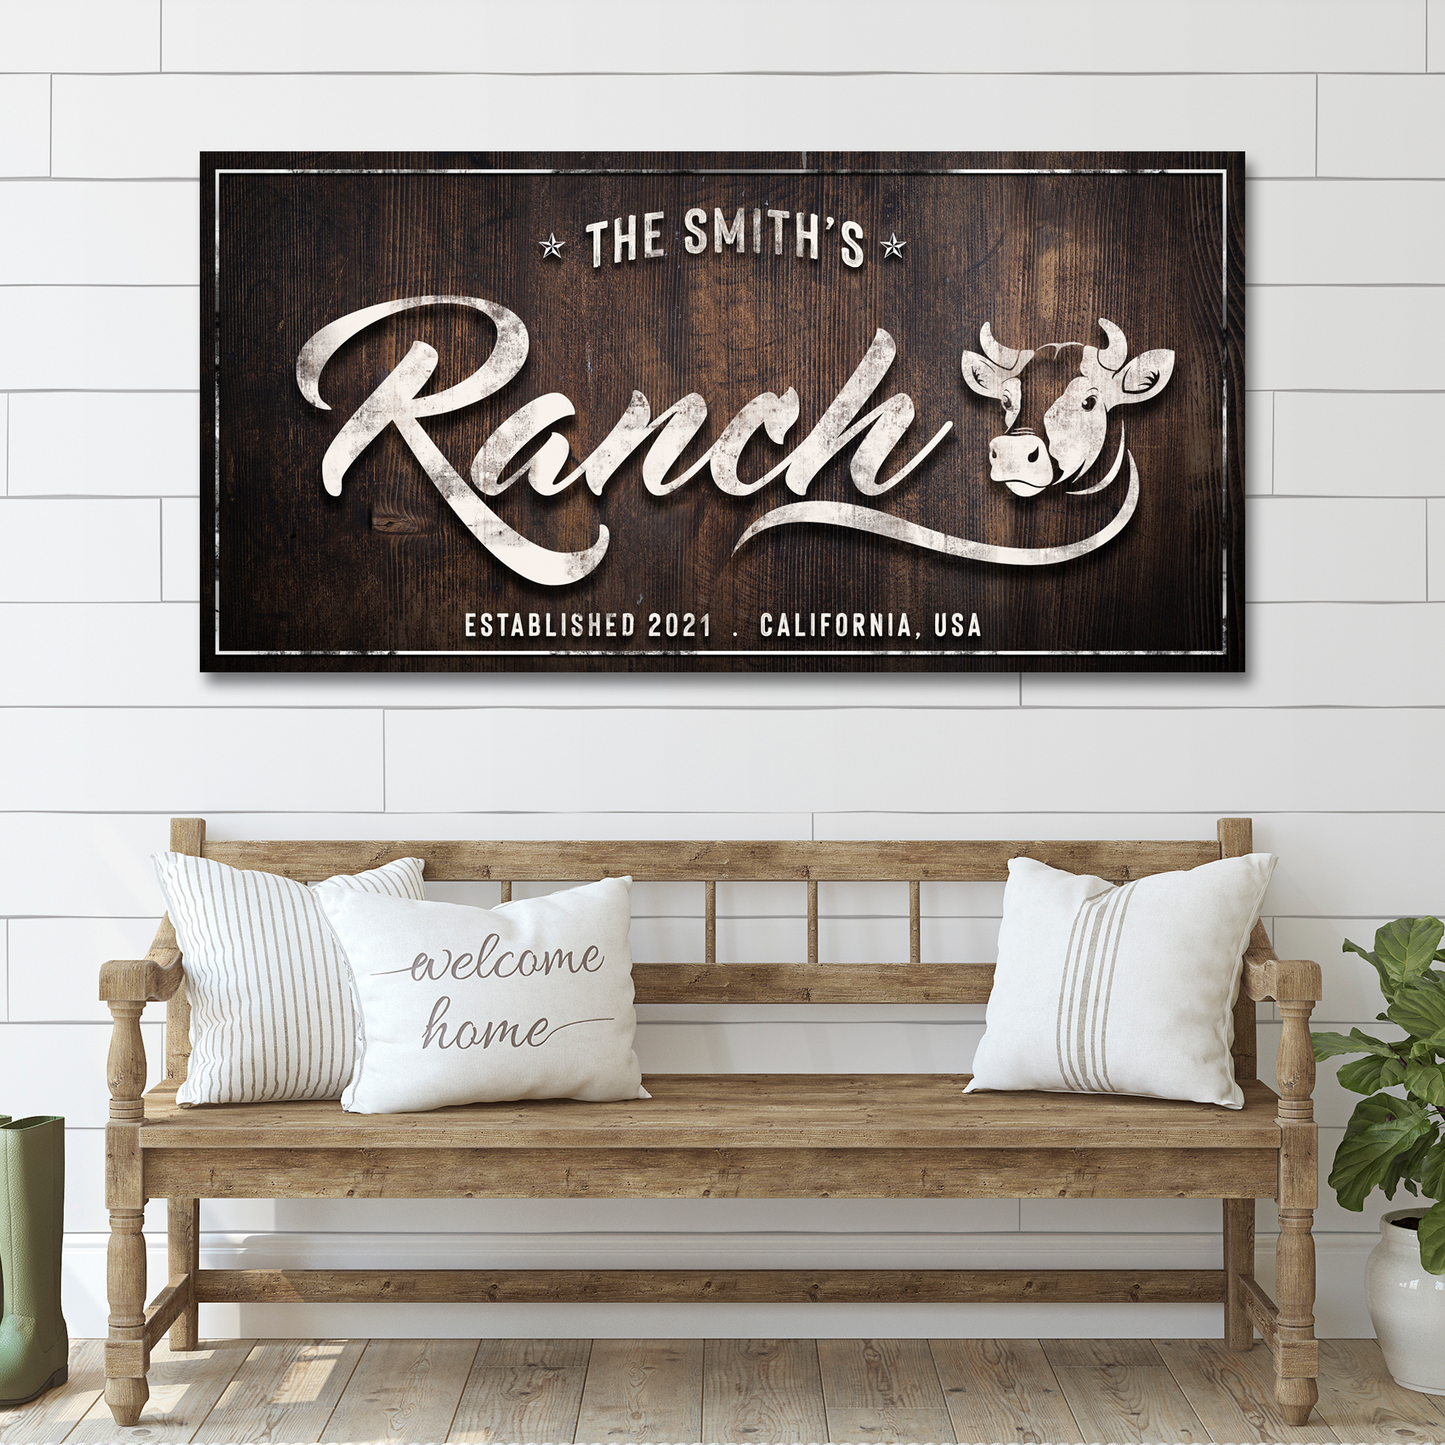 Family Cattle Ranch Sign - Image by Tailored Canvases